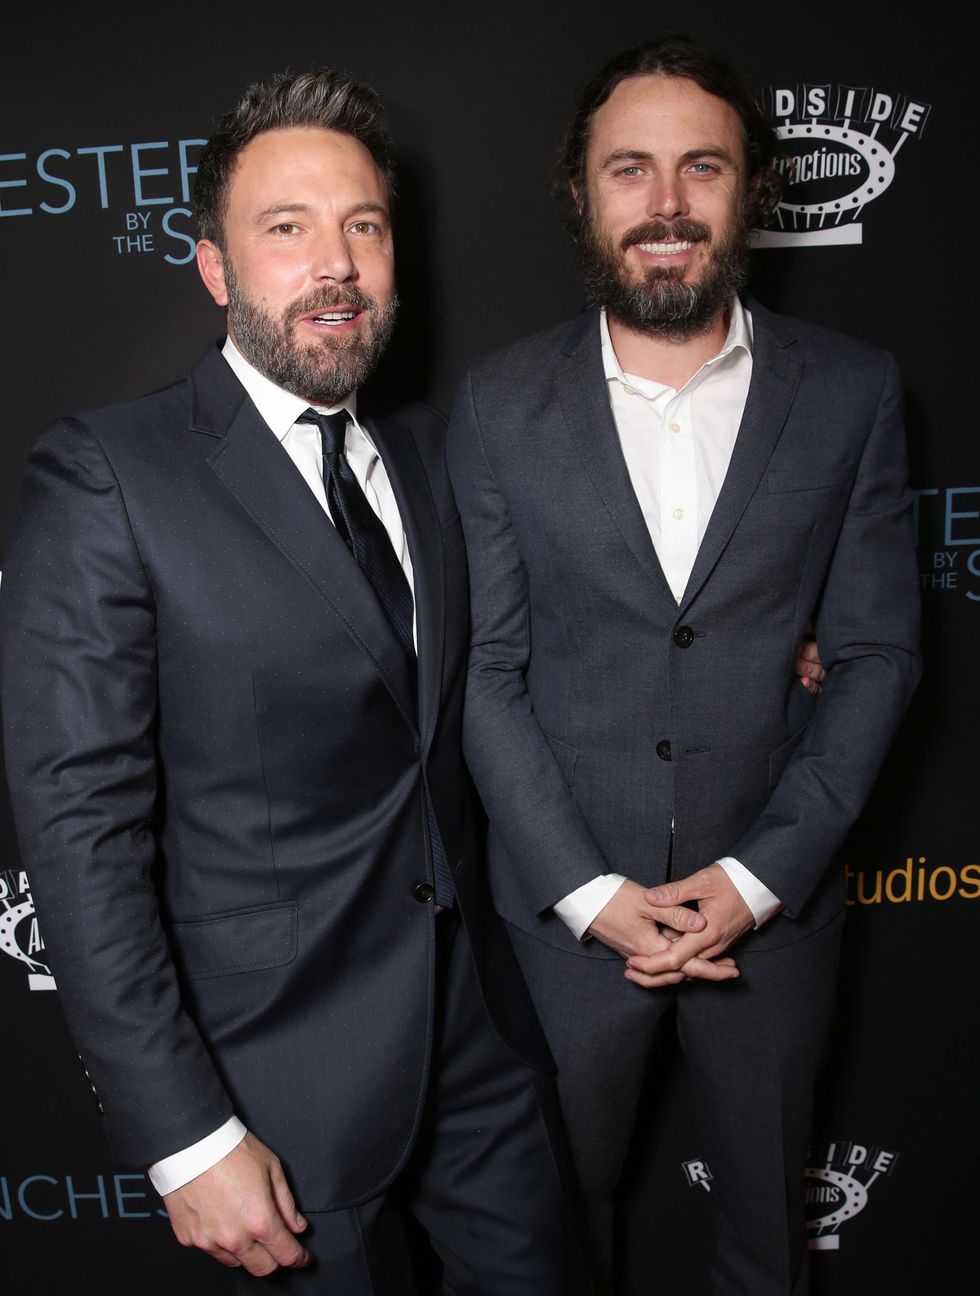 BEVERLY HILLS, CA - NOVEMBER 14:  Ben Affleck and Casey Affleck attend the "Manchester By The Sea" Los Angeles Premiere at AMPAS Samuel Goldwyn Theater on November 14, 2016 in Beverly Hills, California.  (Photo by Todd Williamson/Getty Images for Amazon Studios)